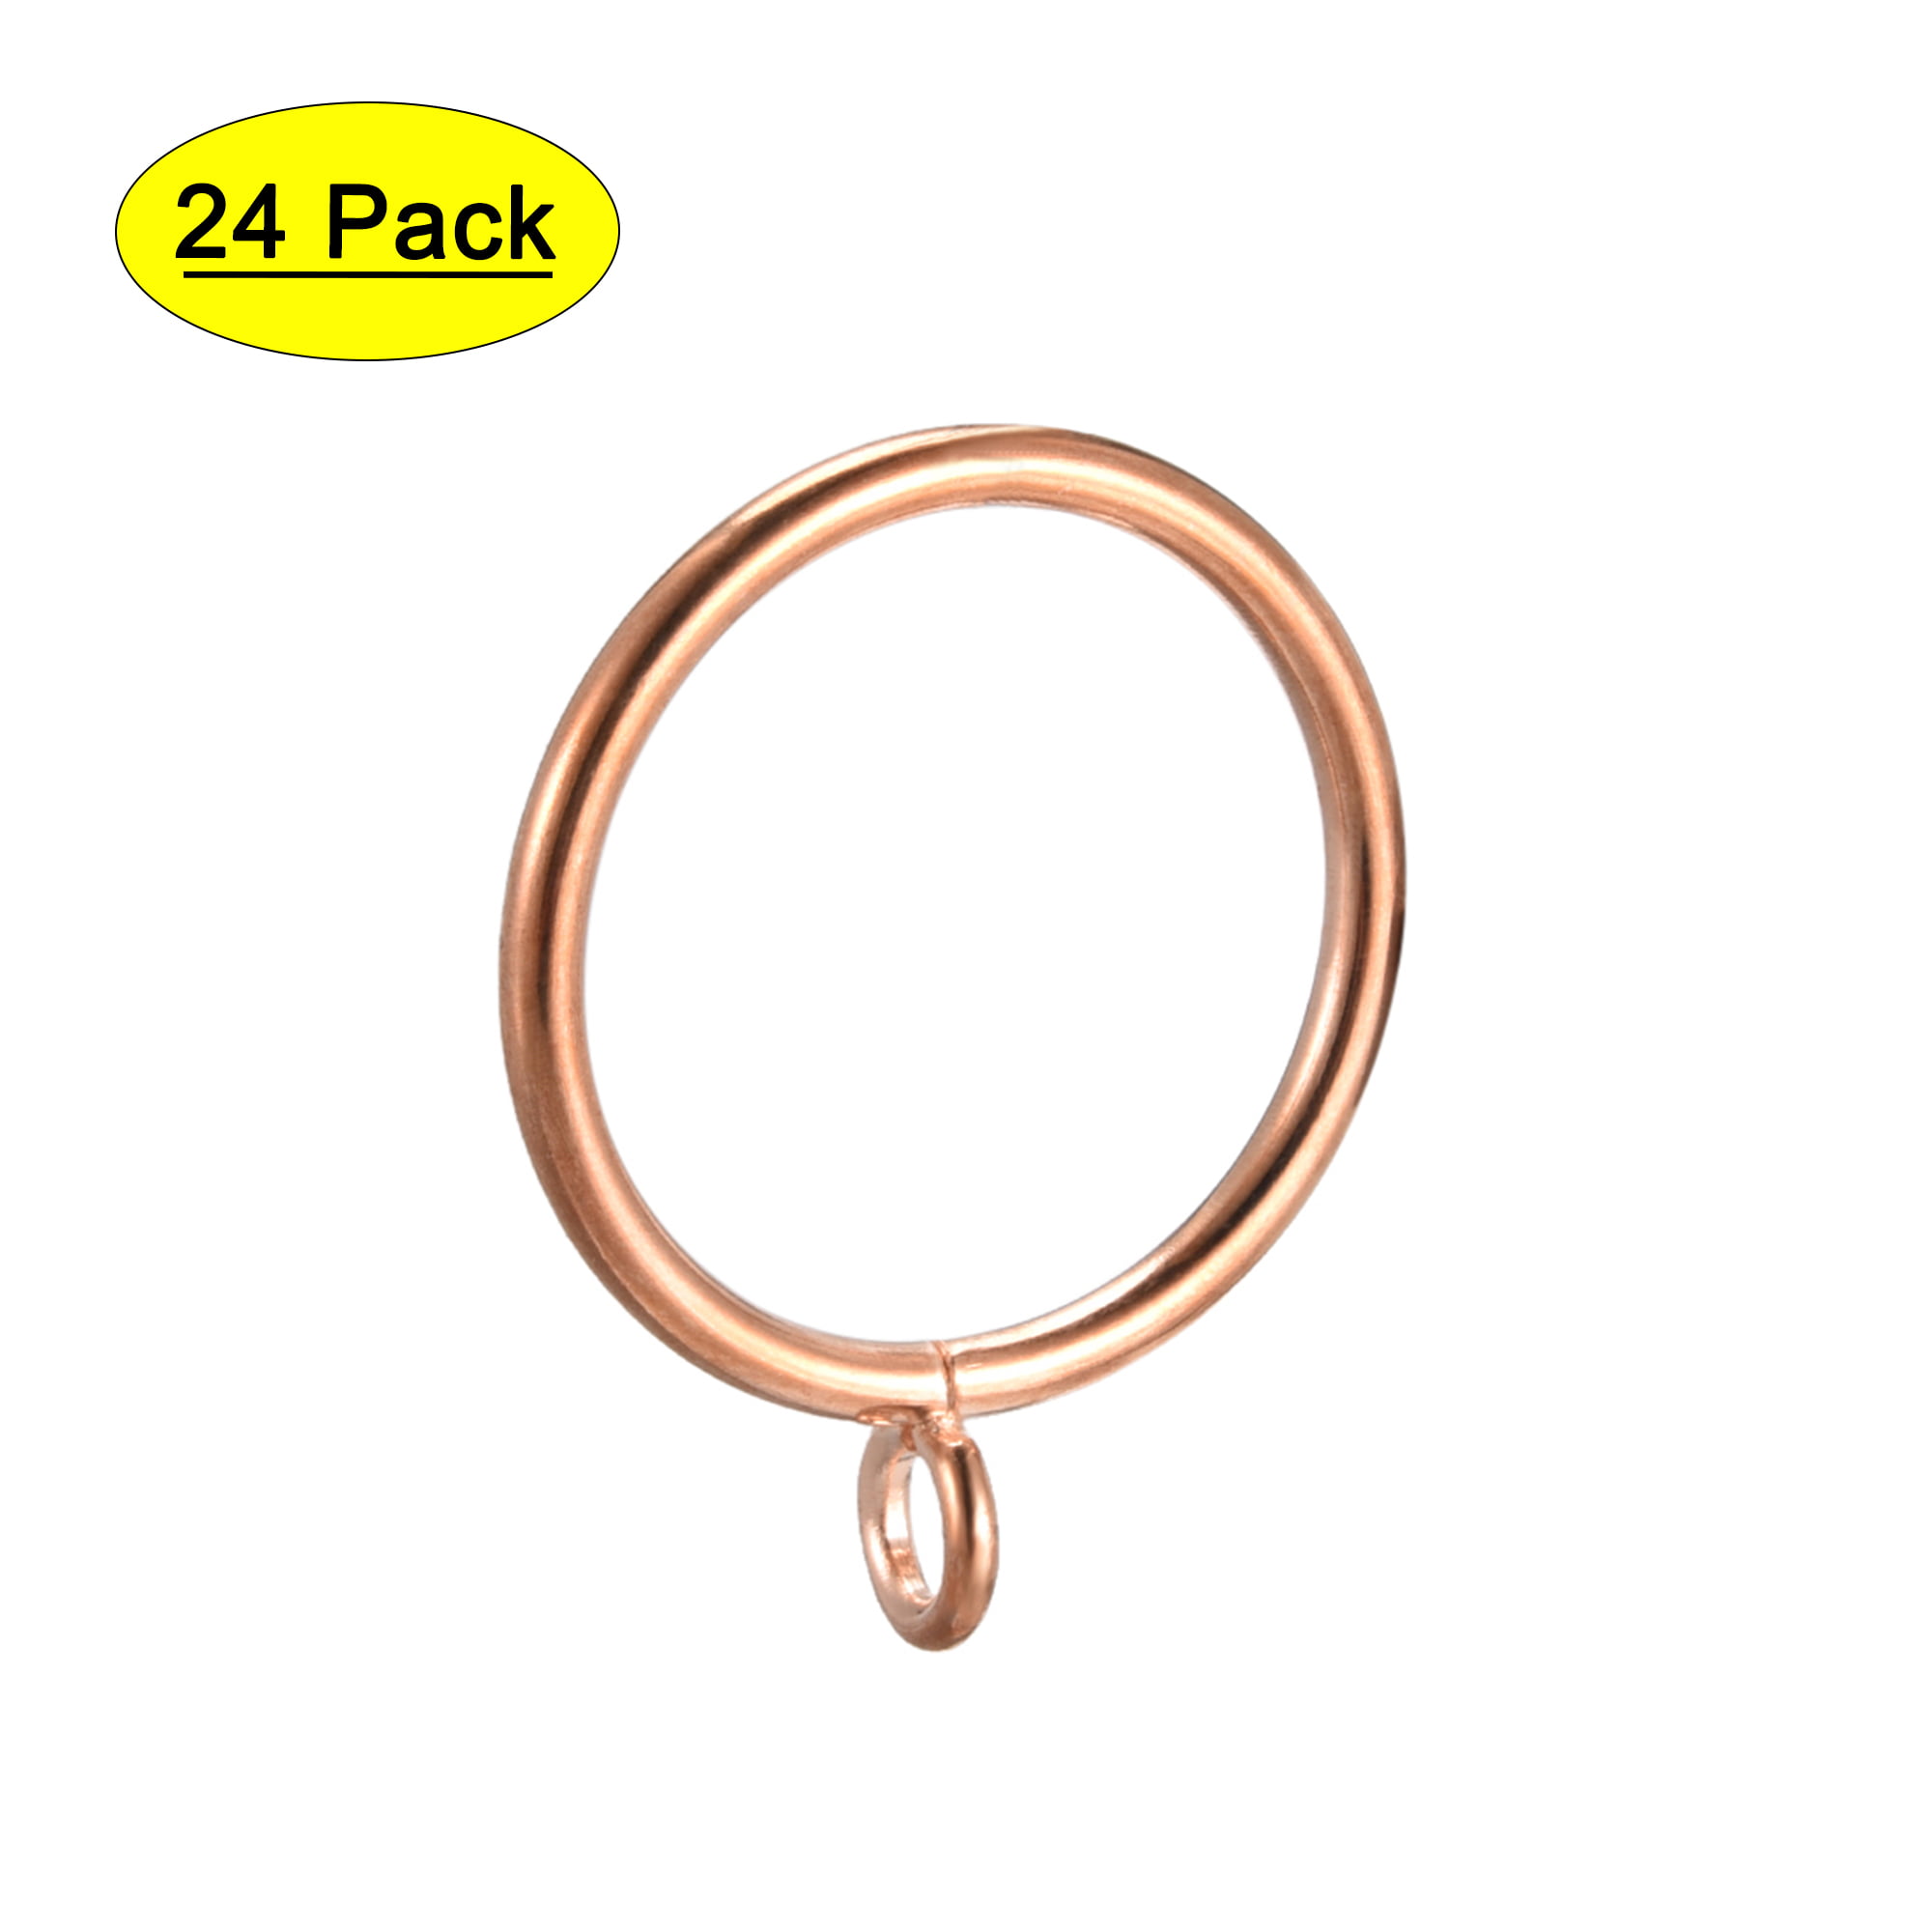 Pack of 24 Strong Metal Curtain Hooks Rings with Fixed eyelets for Curtain pole 30-38mm wide Antique Brass, 40MM Internal Diameter